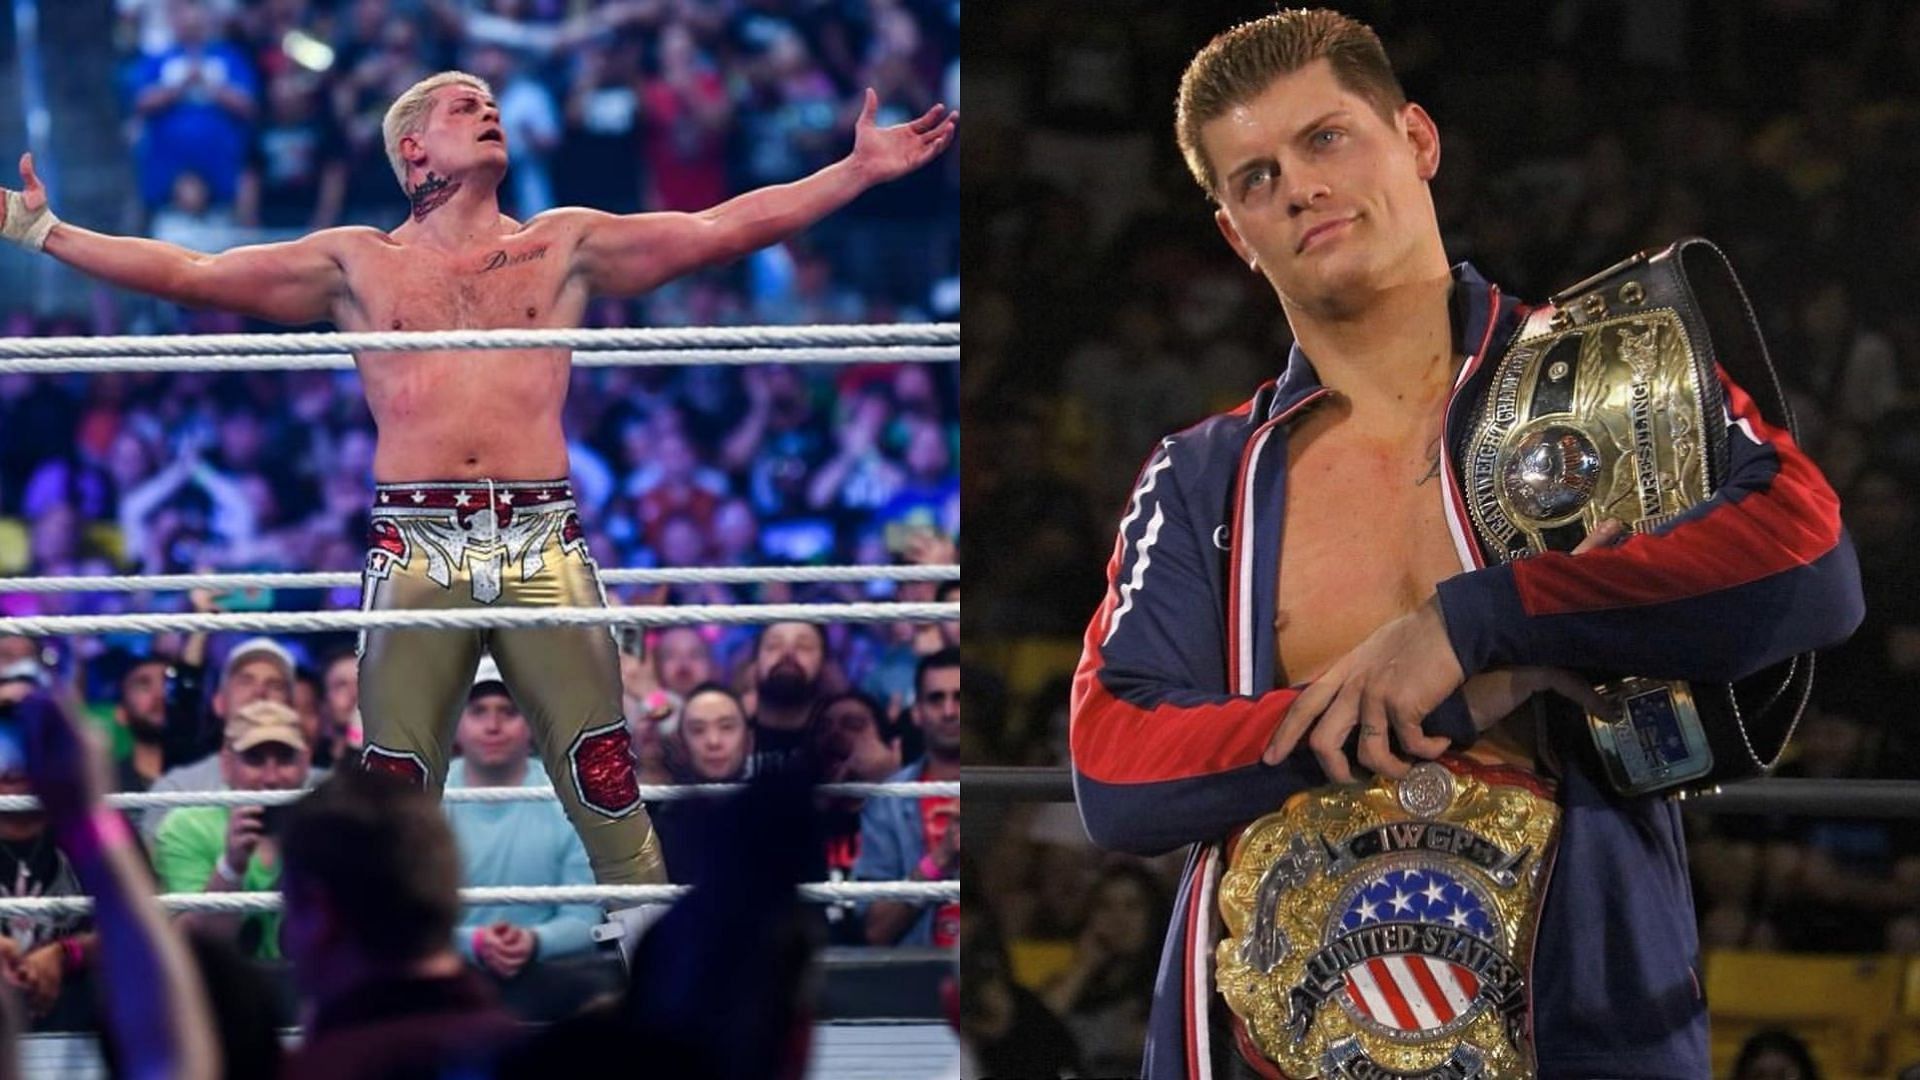 Will Cody Rhodes win the WWE Championship in 2023?